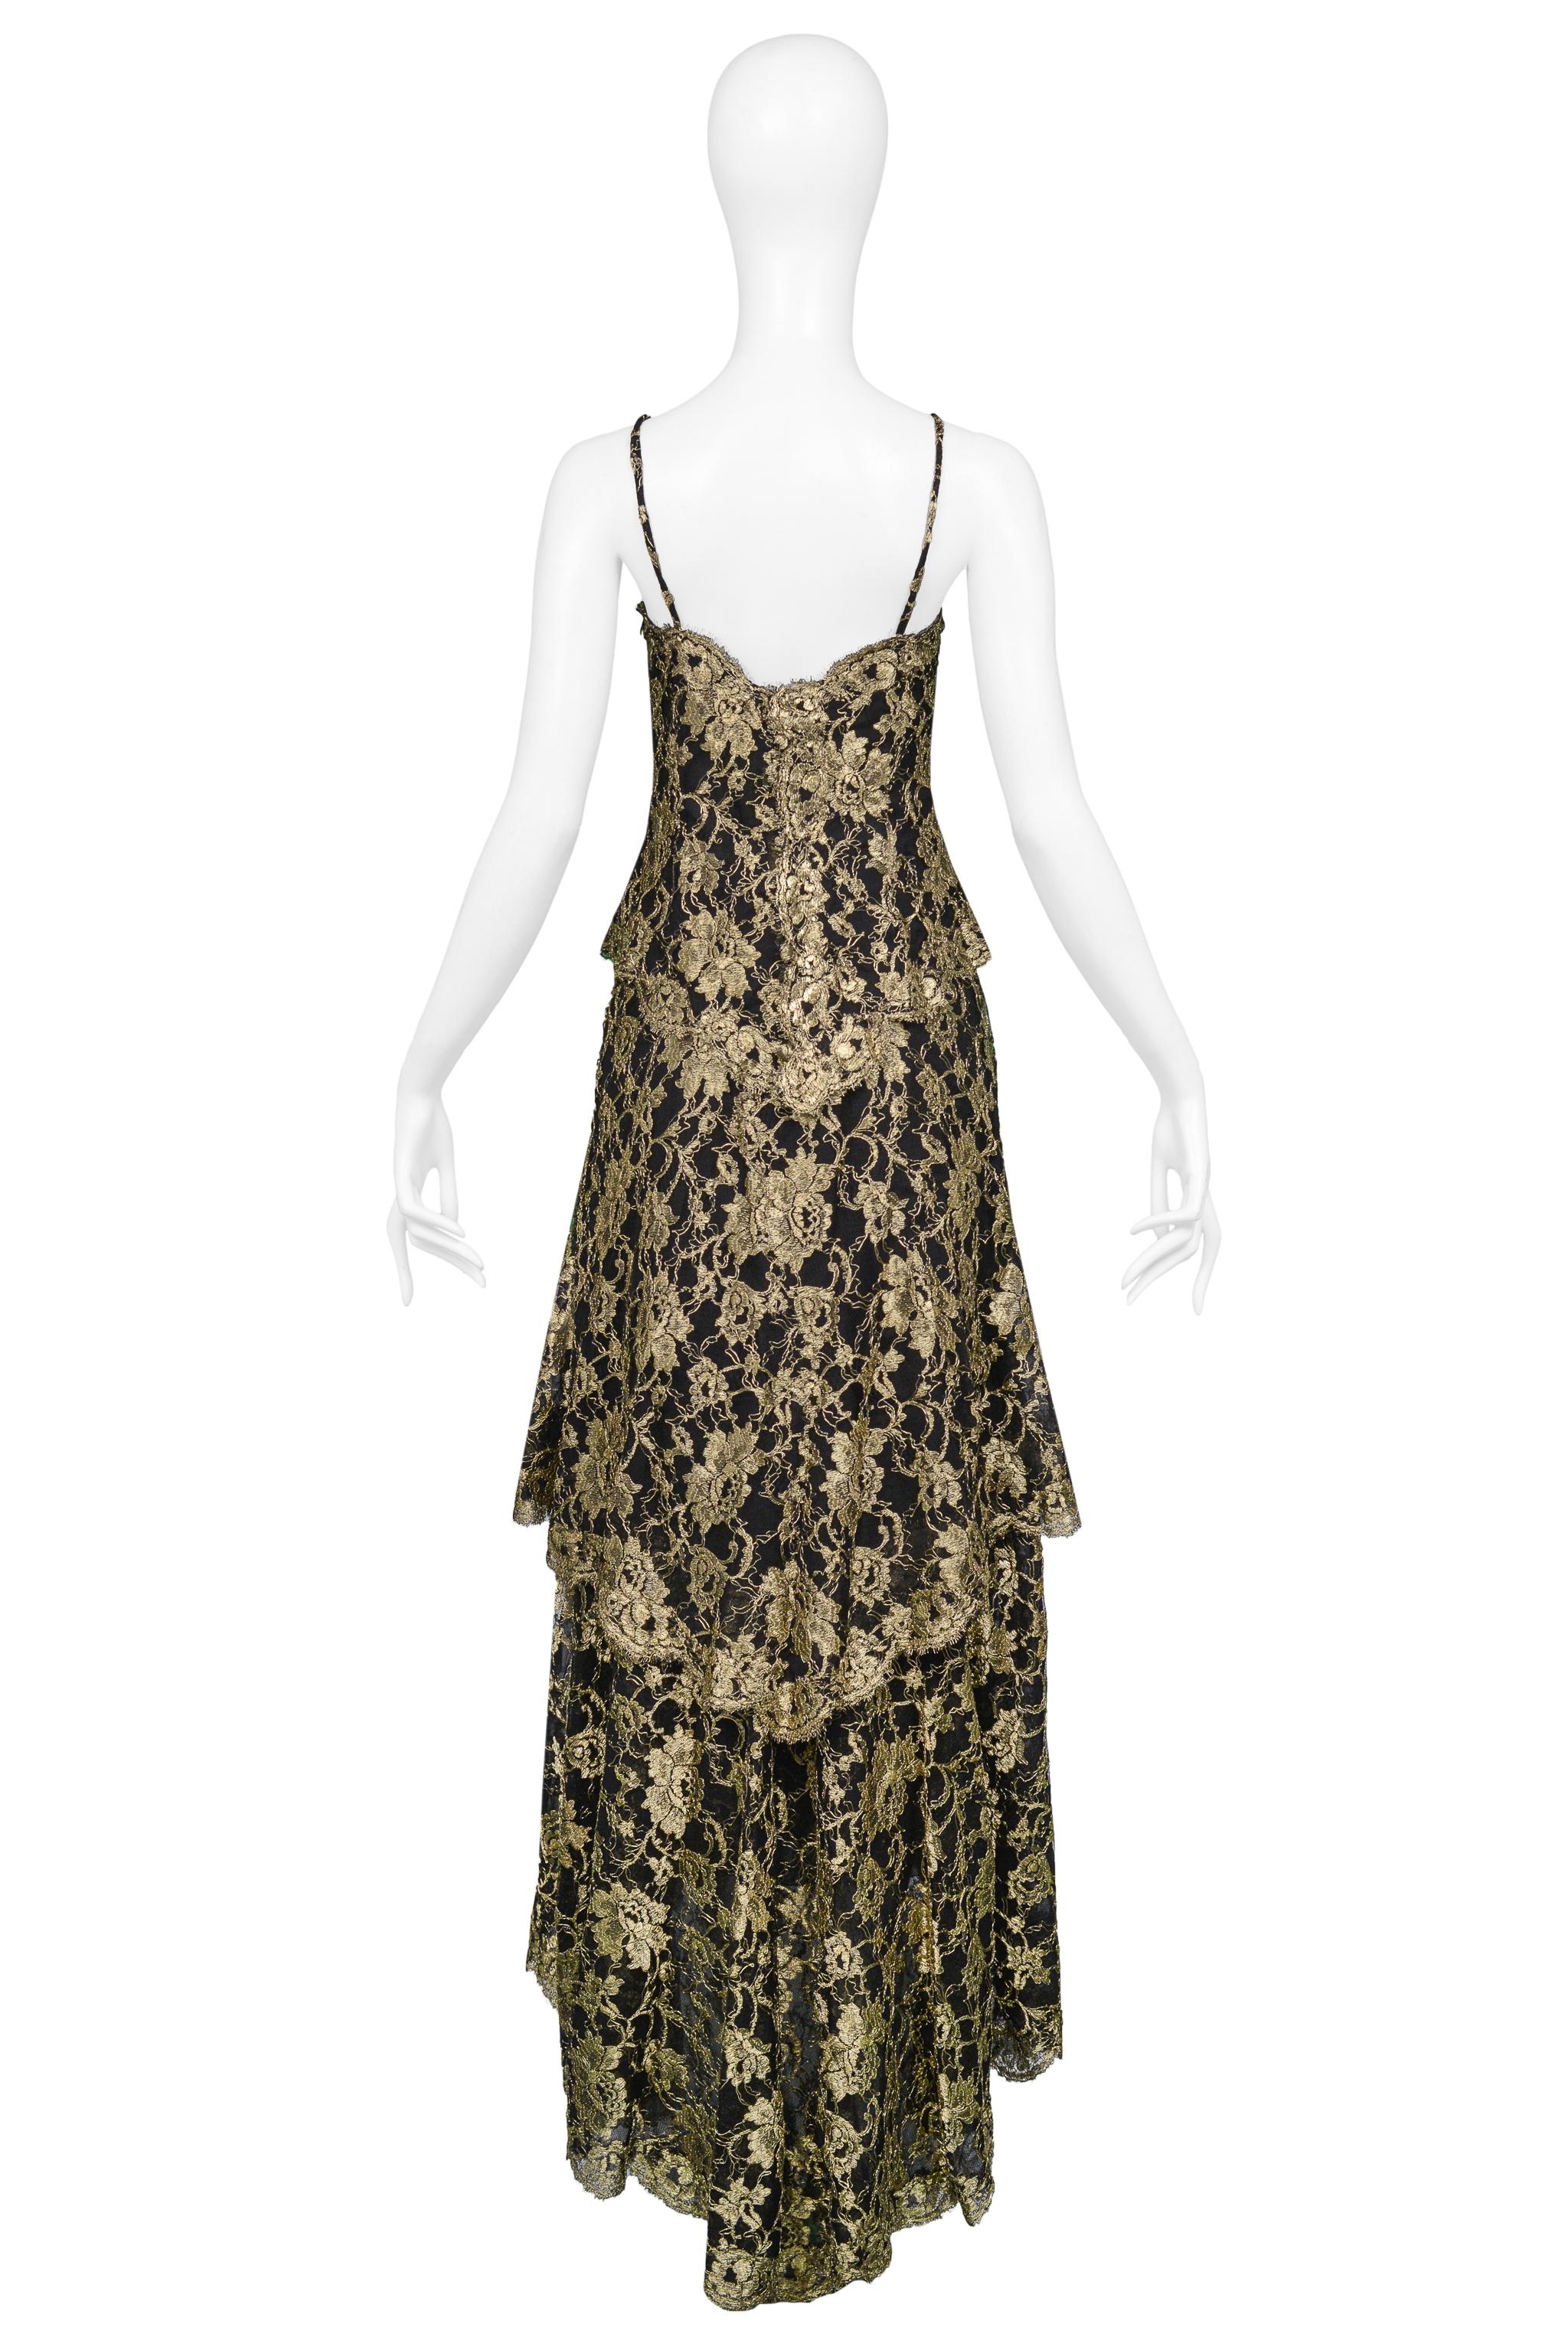 Chanel By Karl Lagerfeld Gold & Black Lace Evening Gown 1986 4